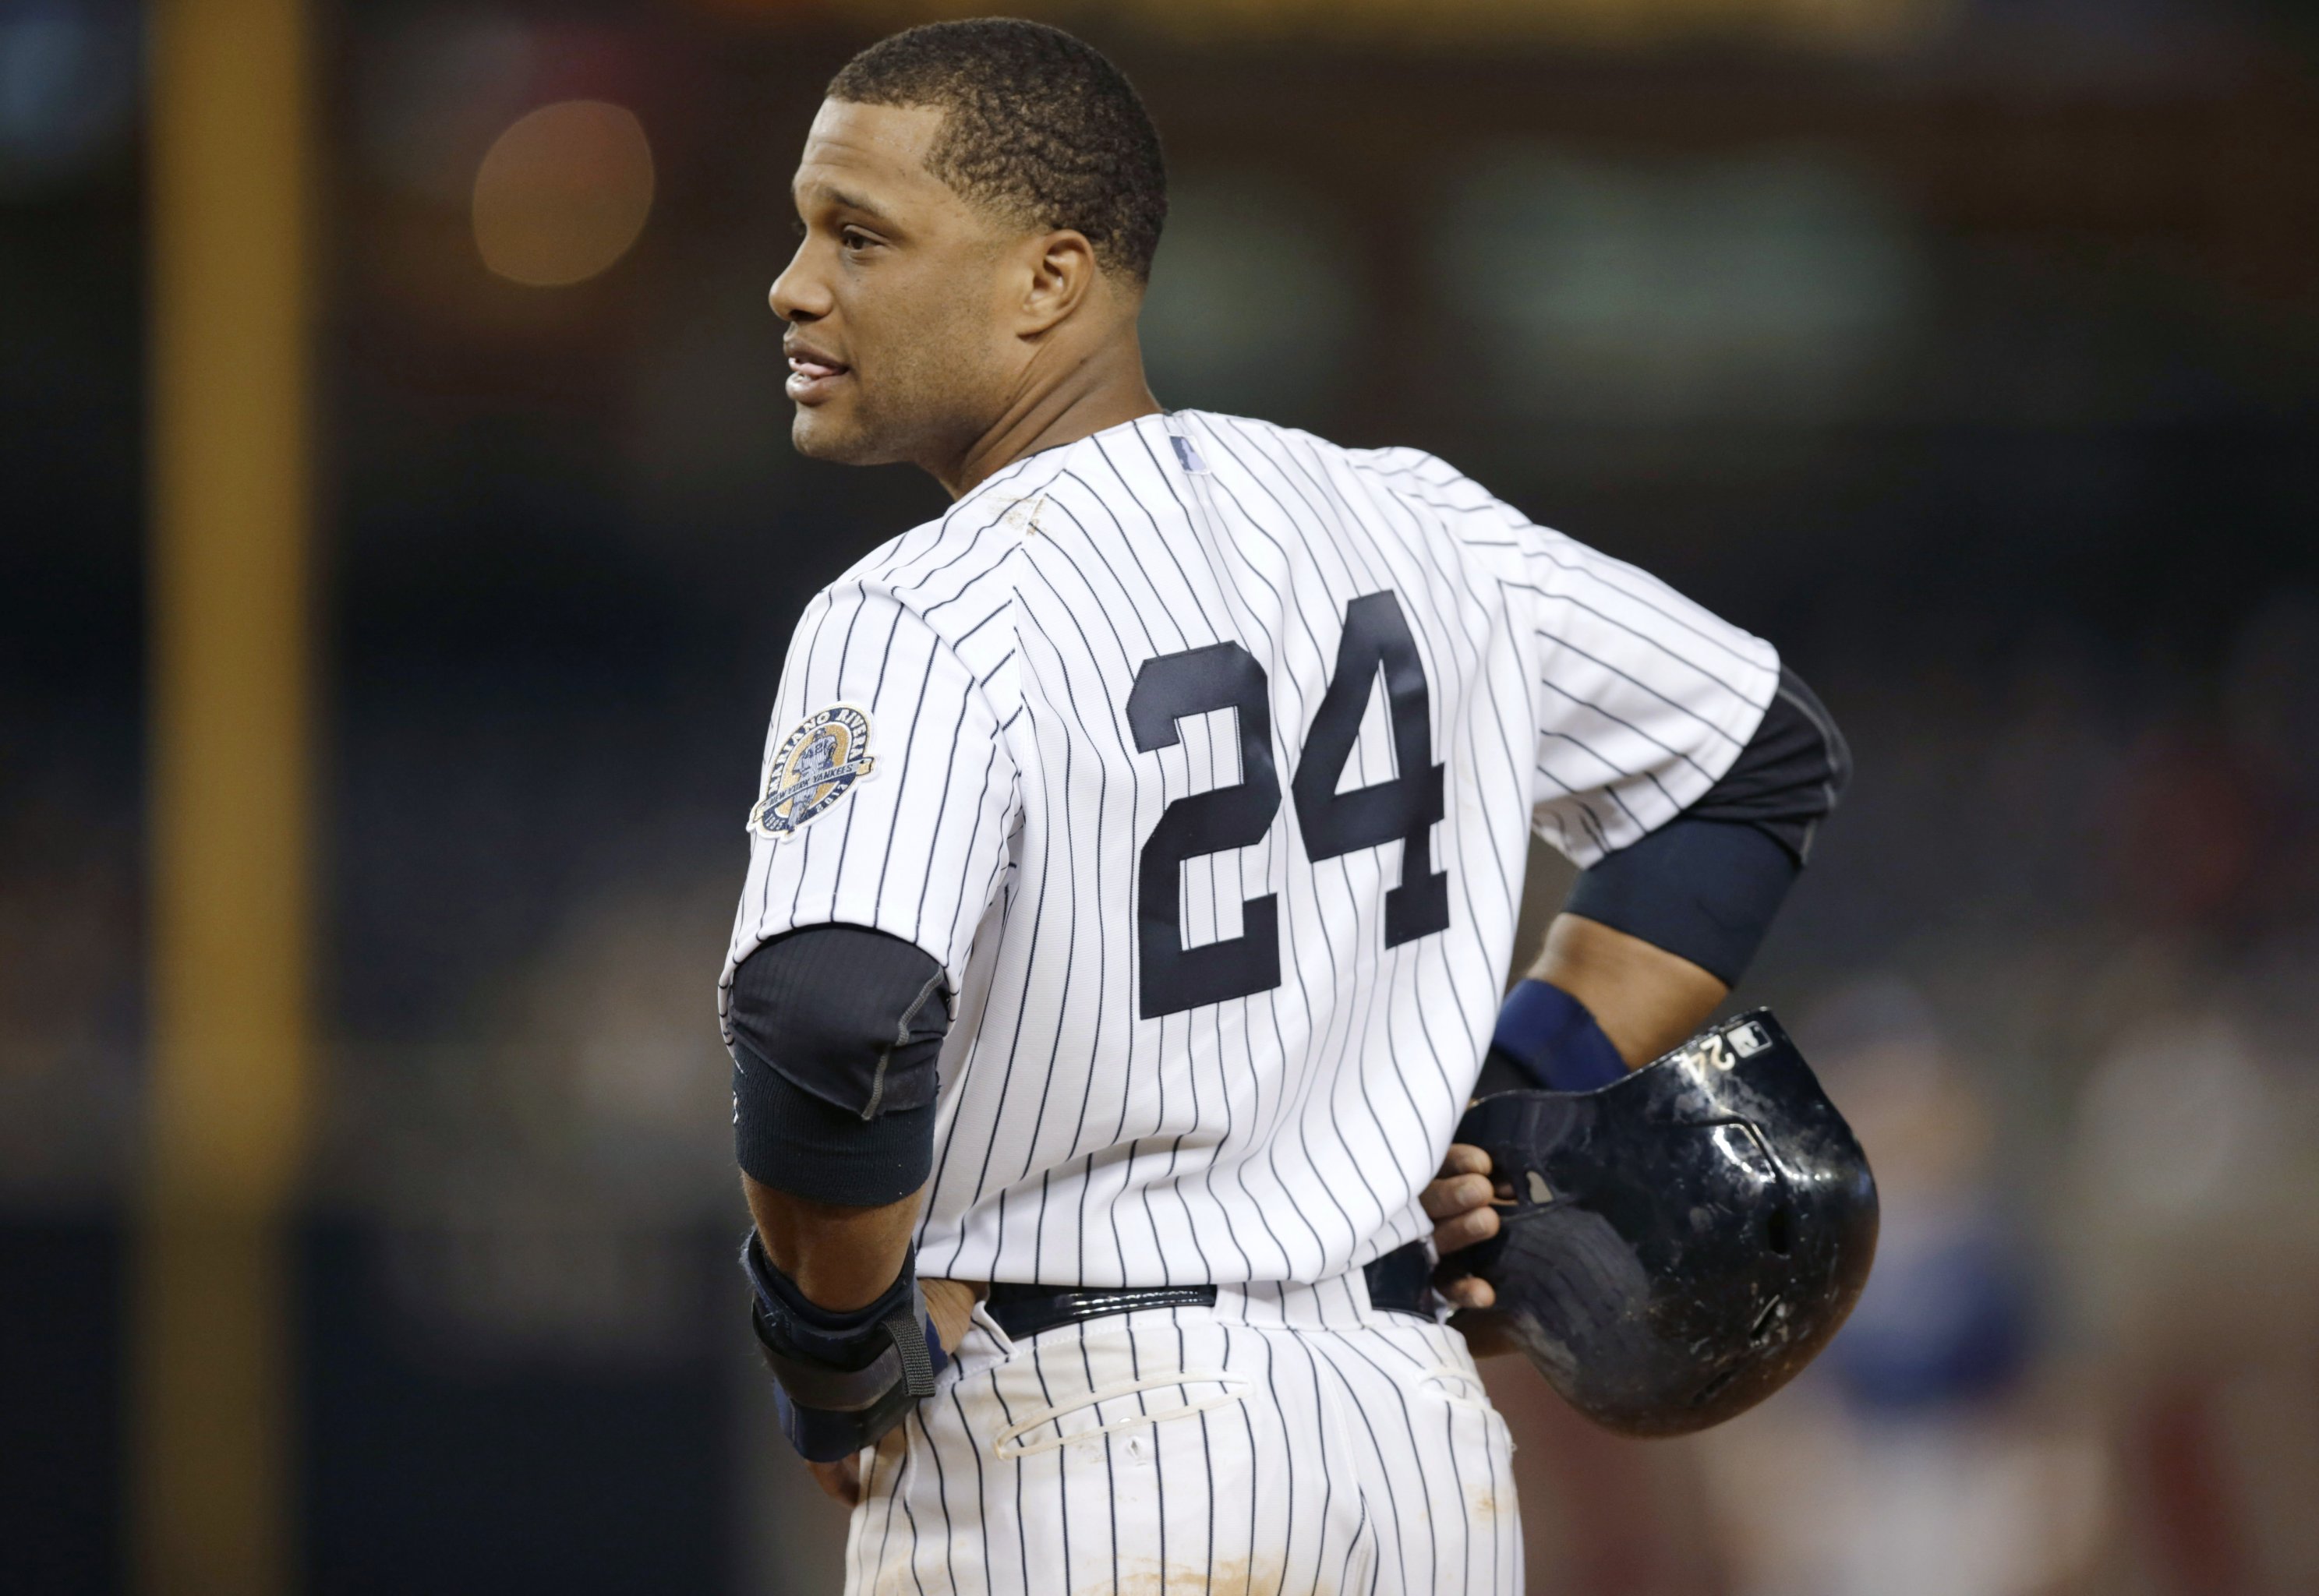 This Day in Yankees History: Robinson Canó signs with the Mariners